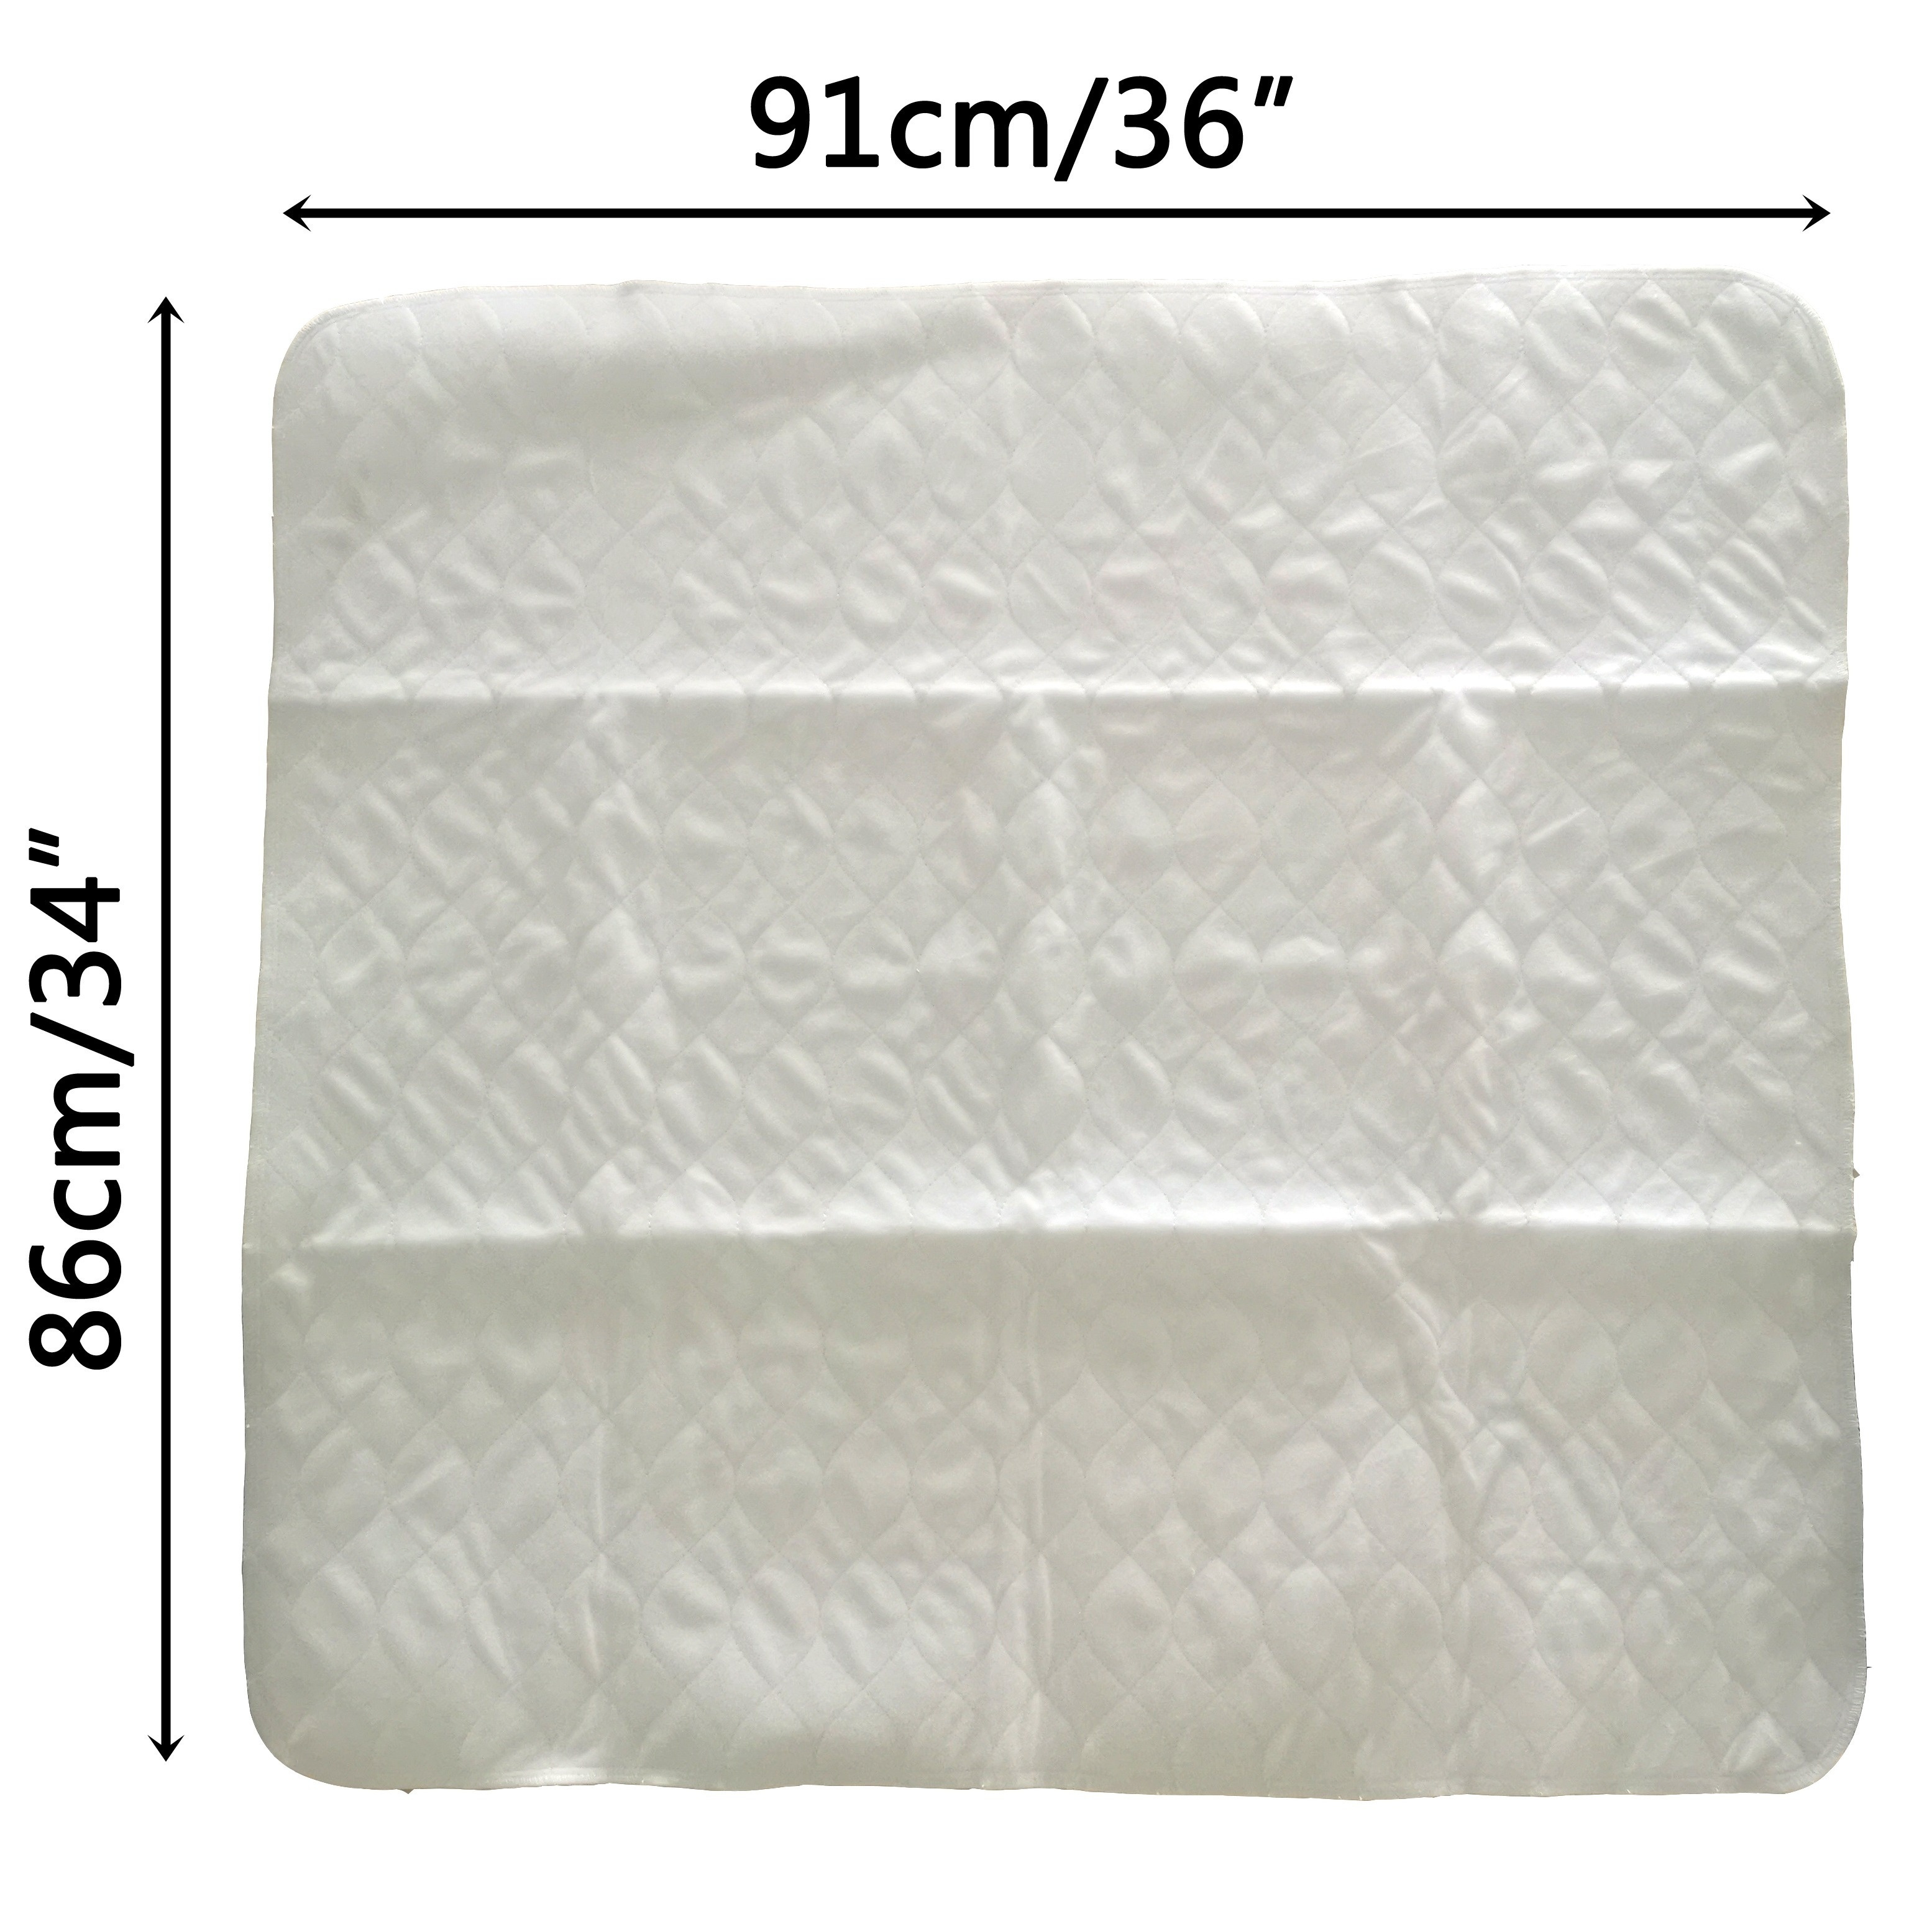 2 Bed Pads Washable Incontinence Underpad Mattress Protector 34 x 36 - Gray